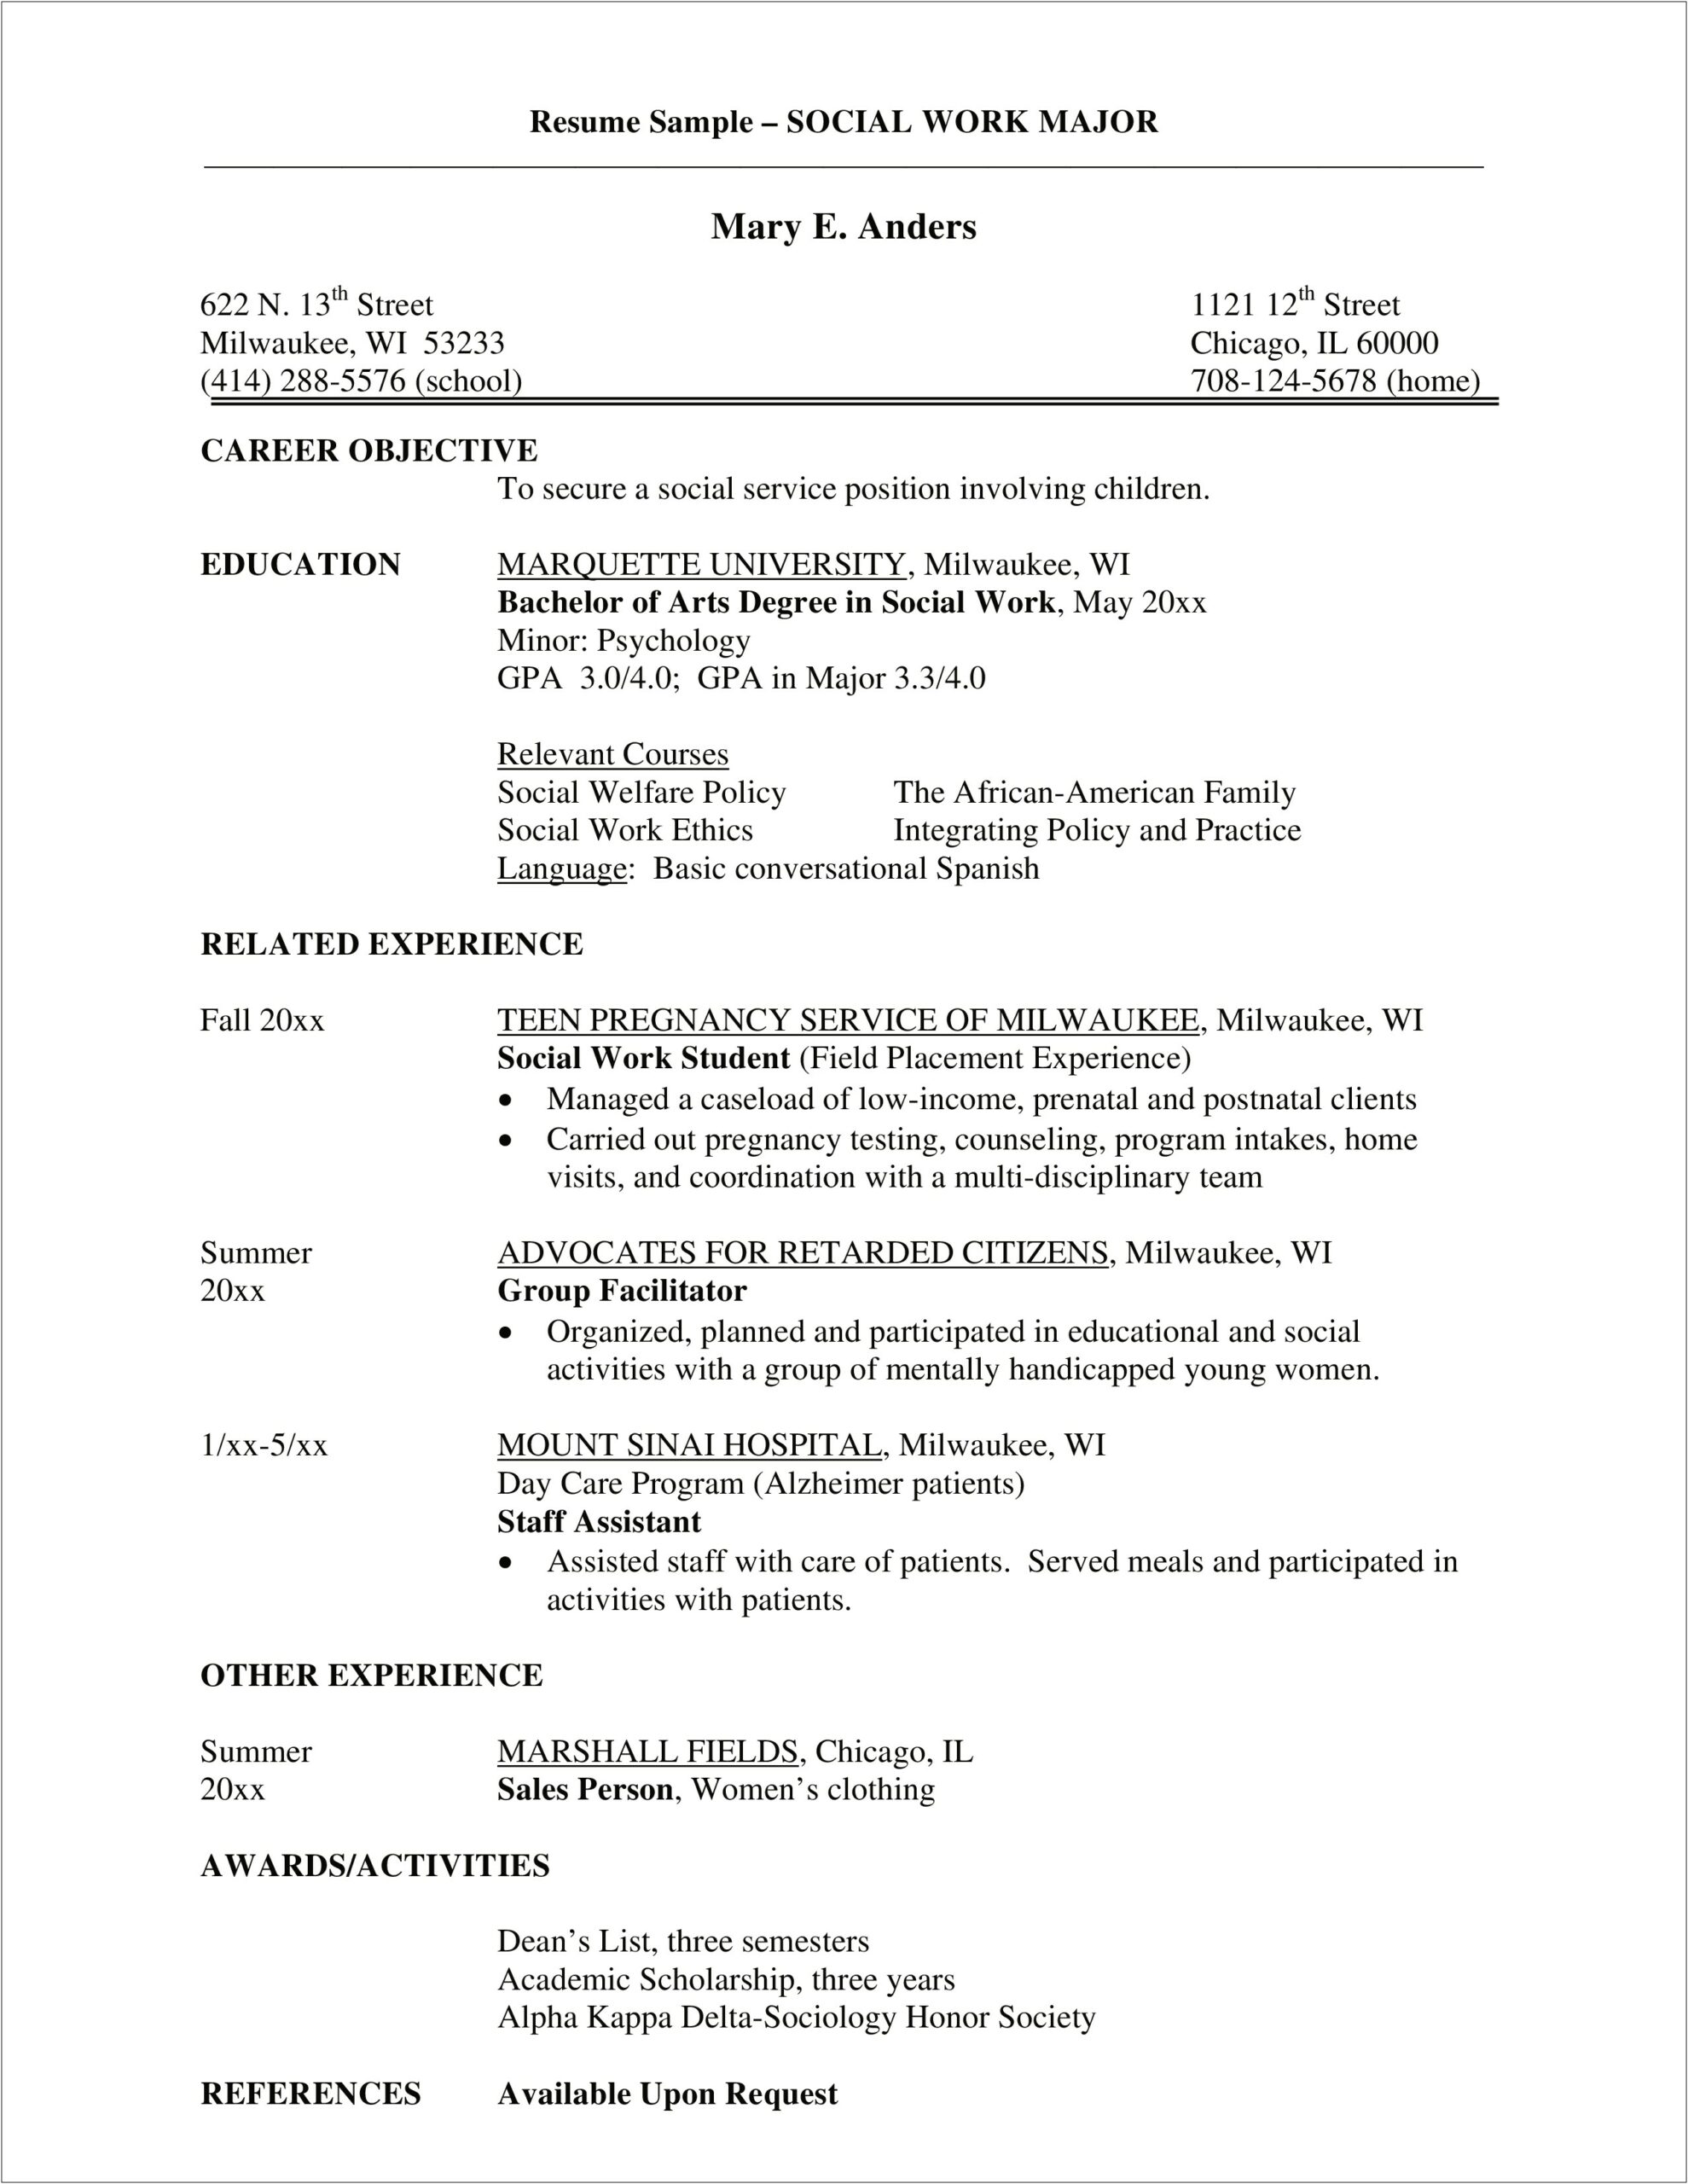 Resume Objective For Entry Level Social Worker